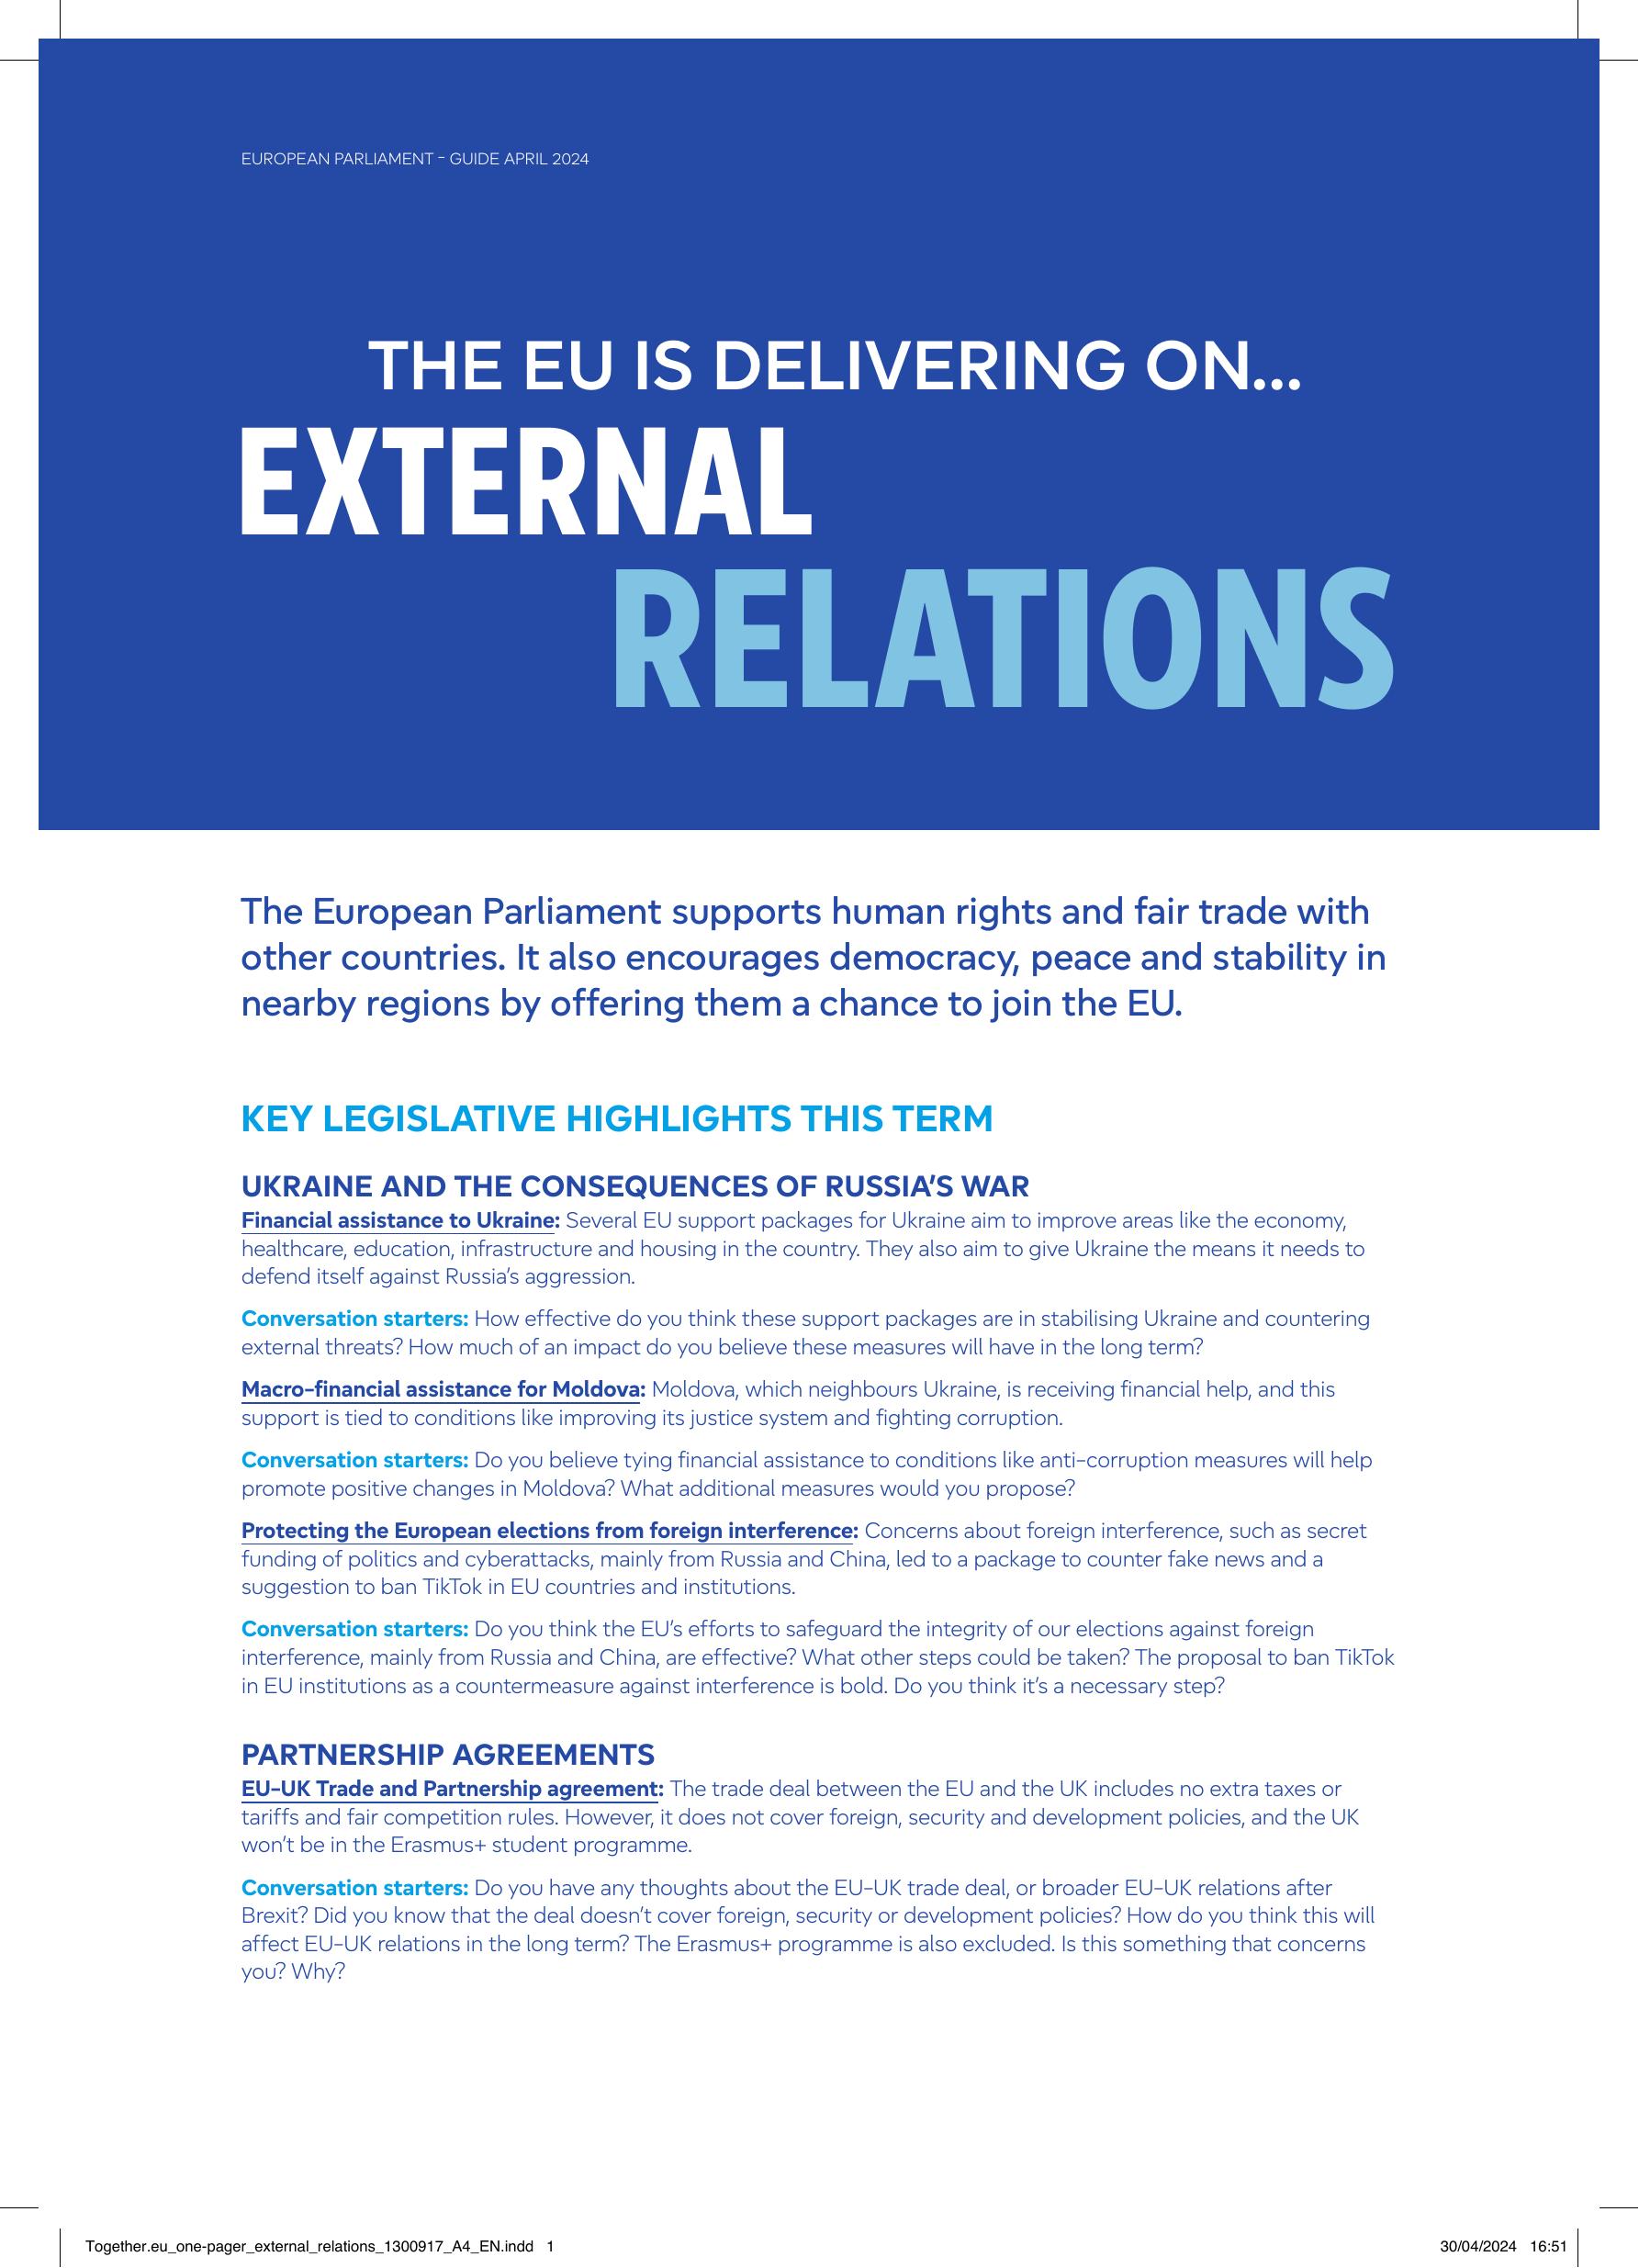 Together.eu_one-pager_external_relations_A4_EN_print.pdf